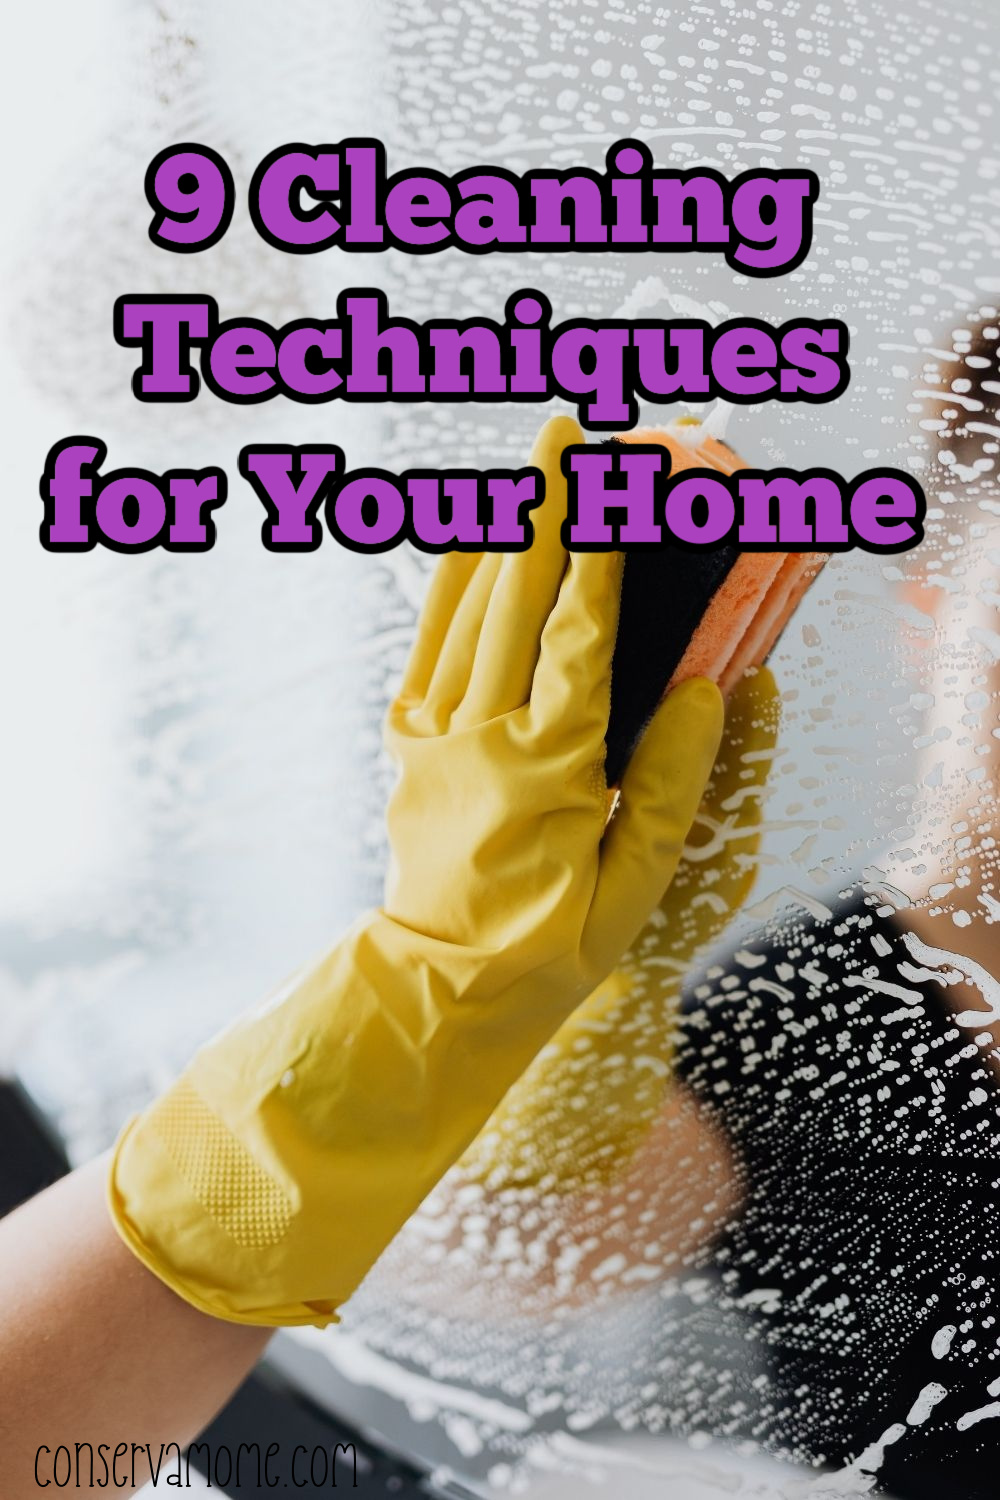 9 Cleaning Techniques for Your Home